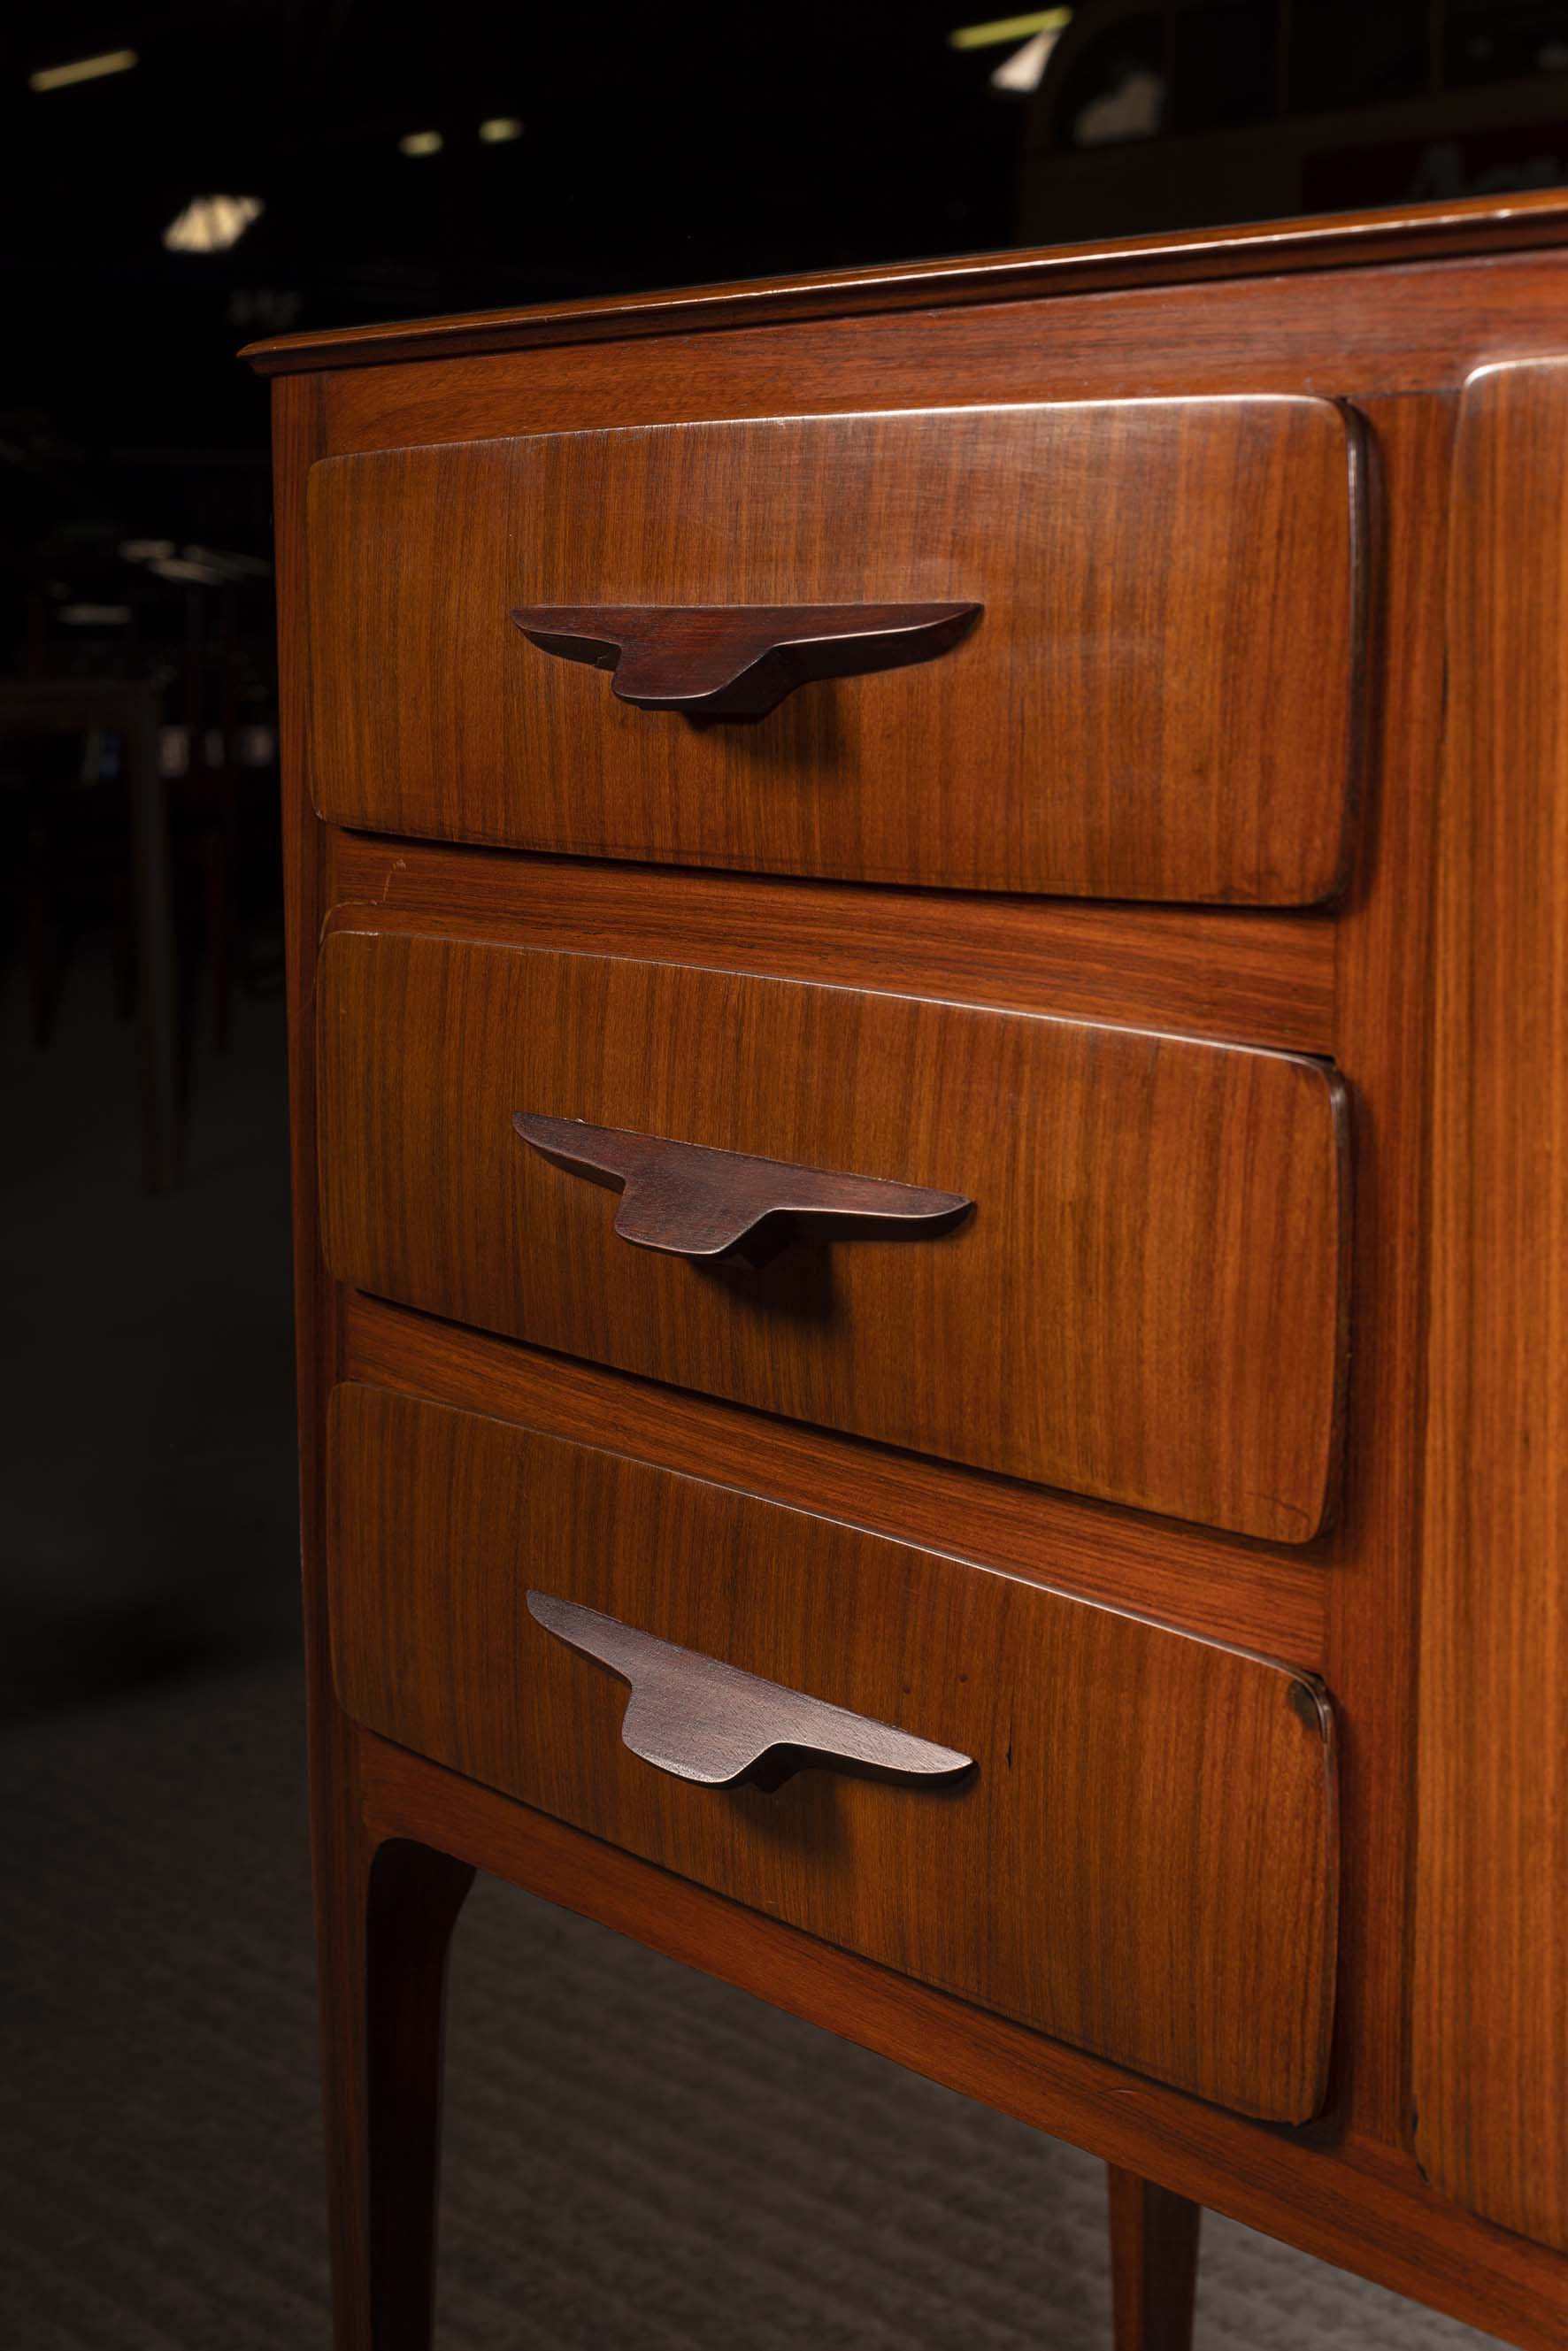 A FINE ROSEWOOD COCKTAIL CABINET, ITALIAN, c.1960, attributed to Vittorio Dassi, with a pair of - Image 2 of 2